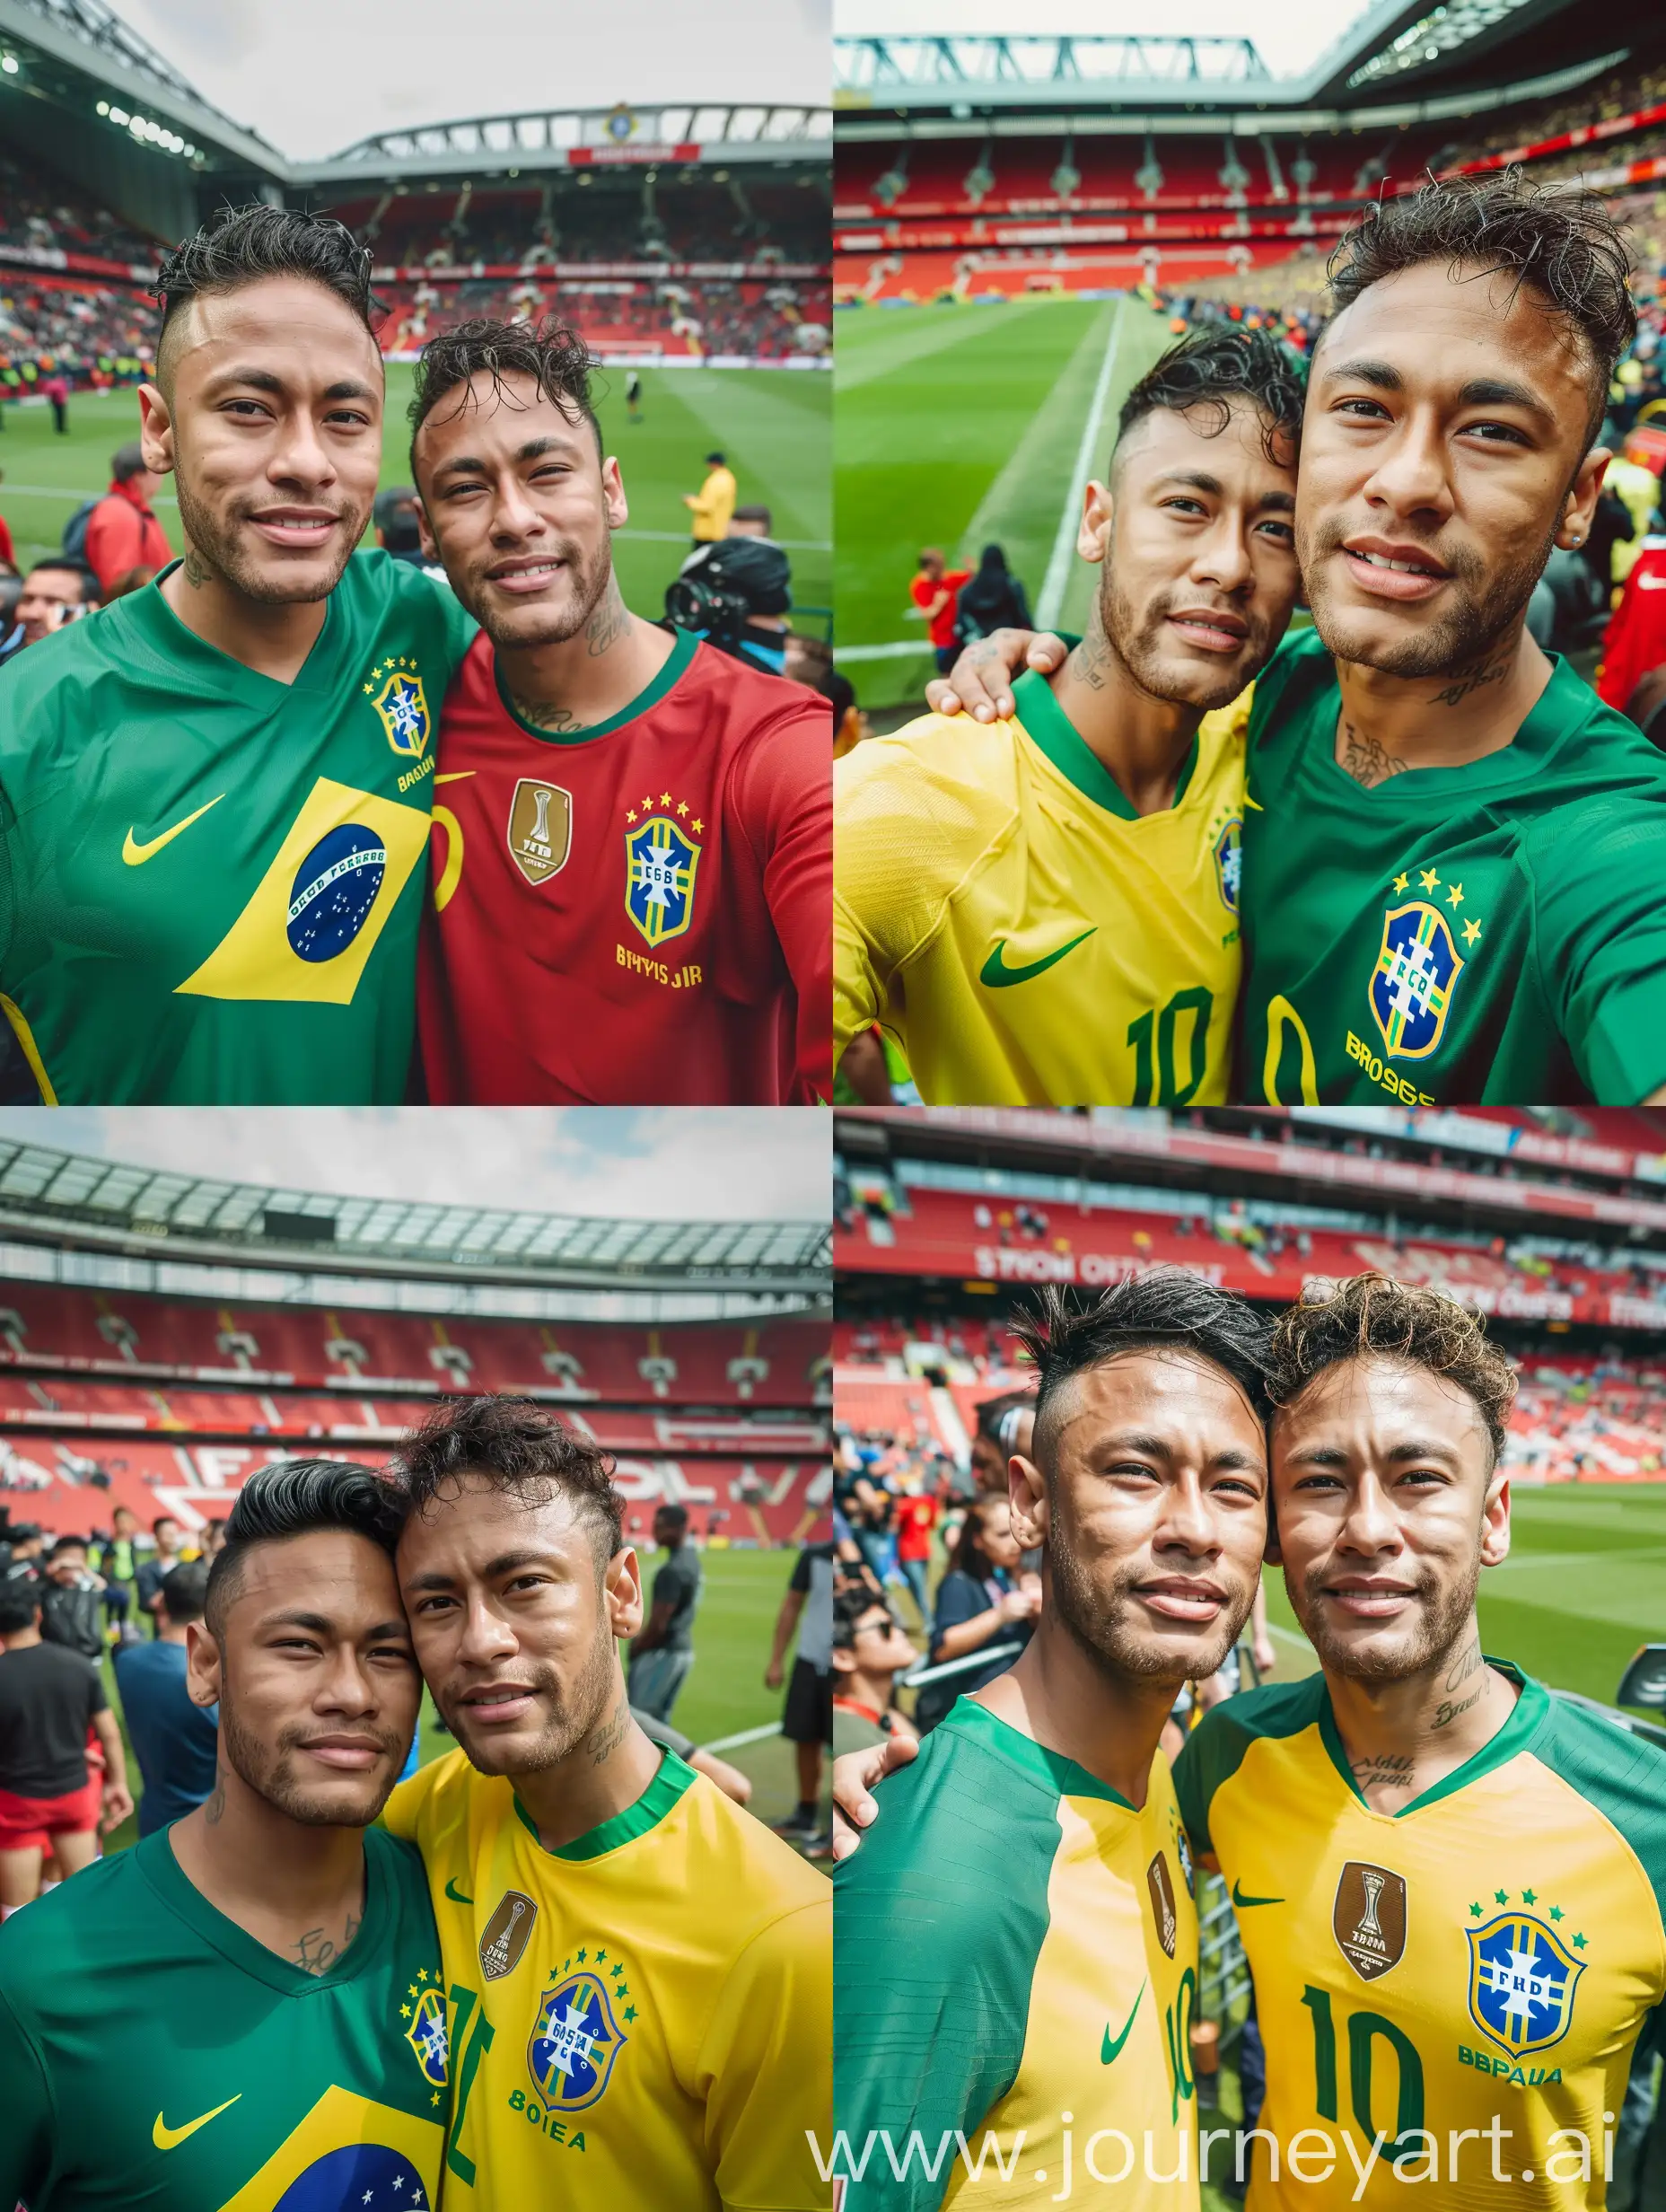 Indonesian-Man-in-Brazil-Jersey-Poses-with-Neymar-Jr-at-Old-Trafford-Stadium